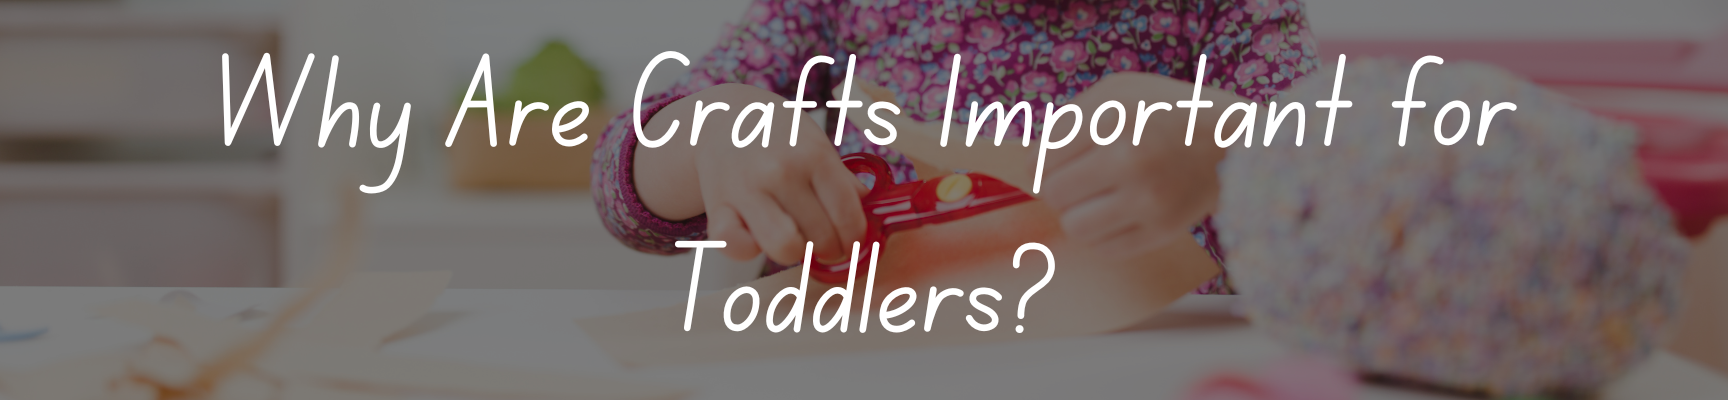 Why Are Crafts Important for Toddlers